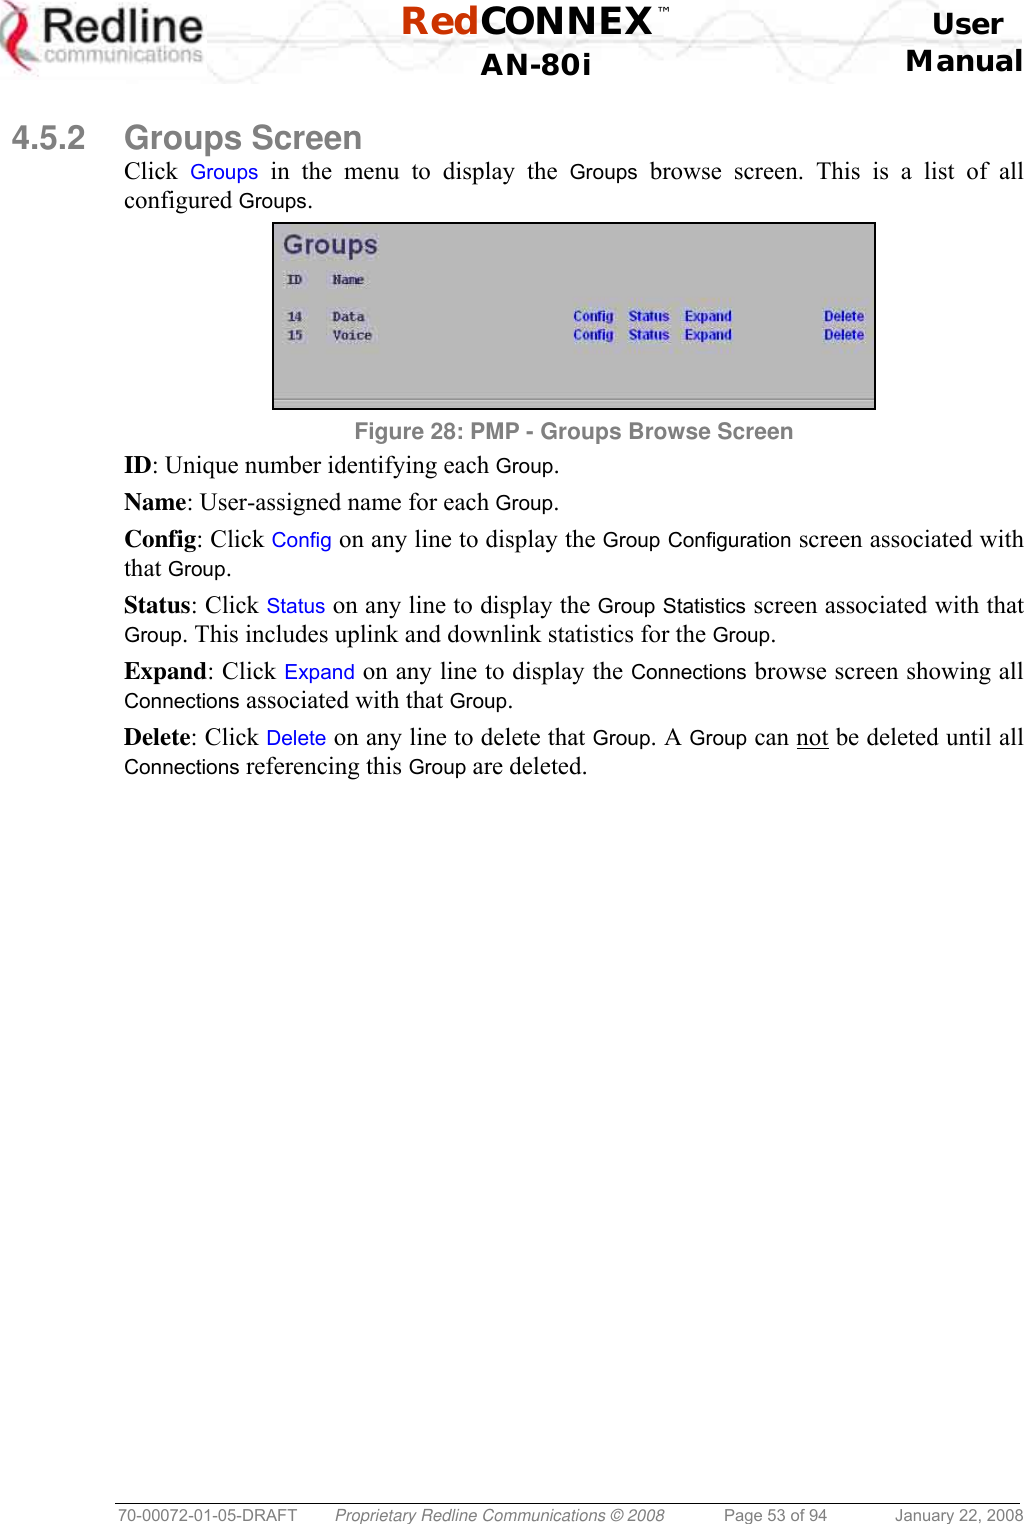  RedCONNEX™    User  AN-80i Manual  70-00072-01-05-DRAFT  Proprietary Redline Communications © 2008  Page 53 of 94  January 22, 2008  4.5.2 Groups Screen Click  Groups in the menu to display the Groups browse screen. This is a list of all configured Groups.  Figure 28: PMP - Groups Browse Screen ID: Unique number identifying each Group. Name: User-assigned name for each Group. Config: Click Config on any line to display the Group Configuration screen associated with that Group. Status: Click Status on any line to display the Group Statistics screen associated with that Group. This includes uplink and downlink statistics for the Group. Expand: Click Expand on any line to display the Connections browse screen showing all Connections associated with that Group. Delete: Click Delete on any line to delete that Group. A Group can not be deleted until all Connections referencing this Group are deleted. 